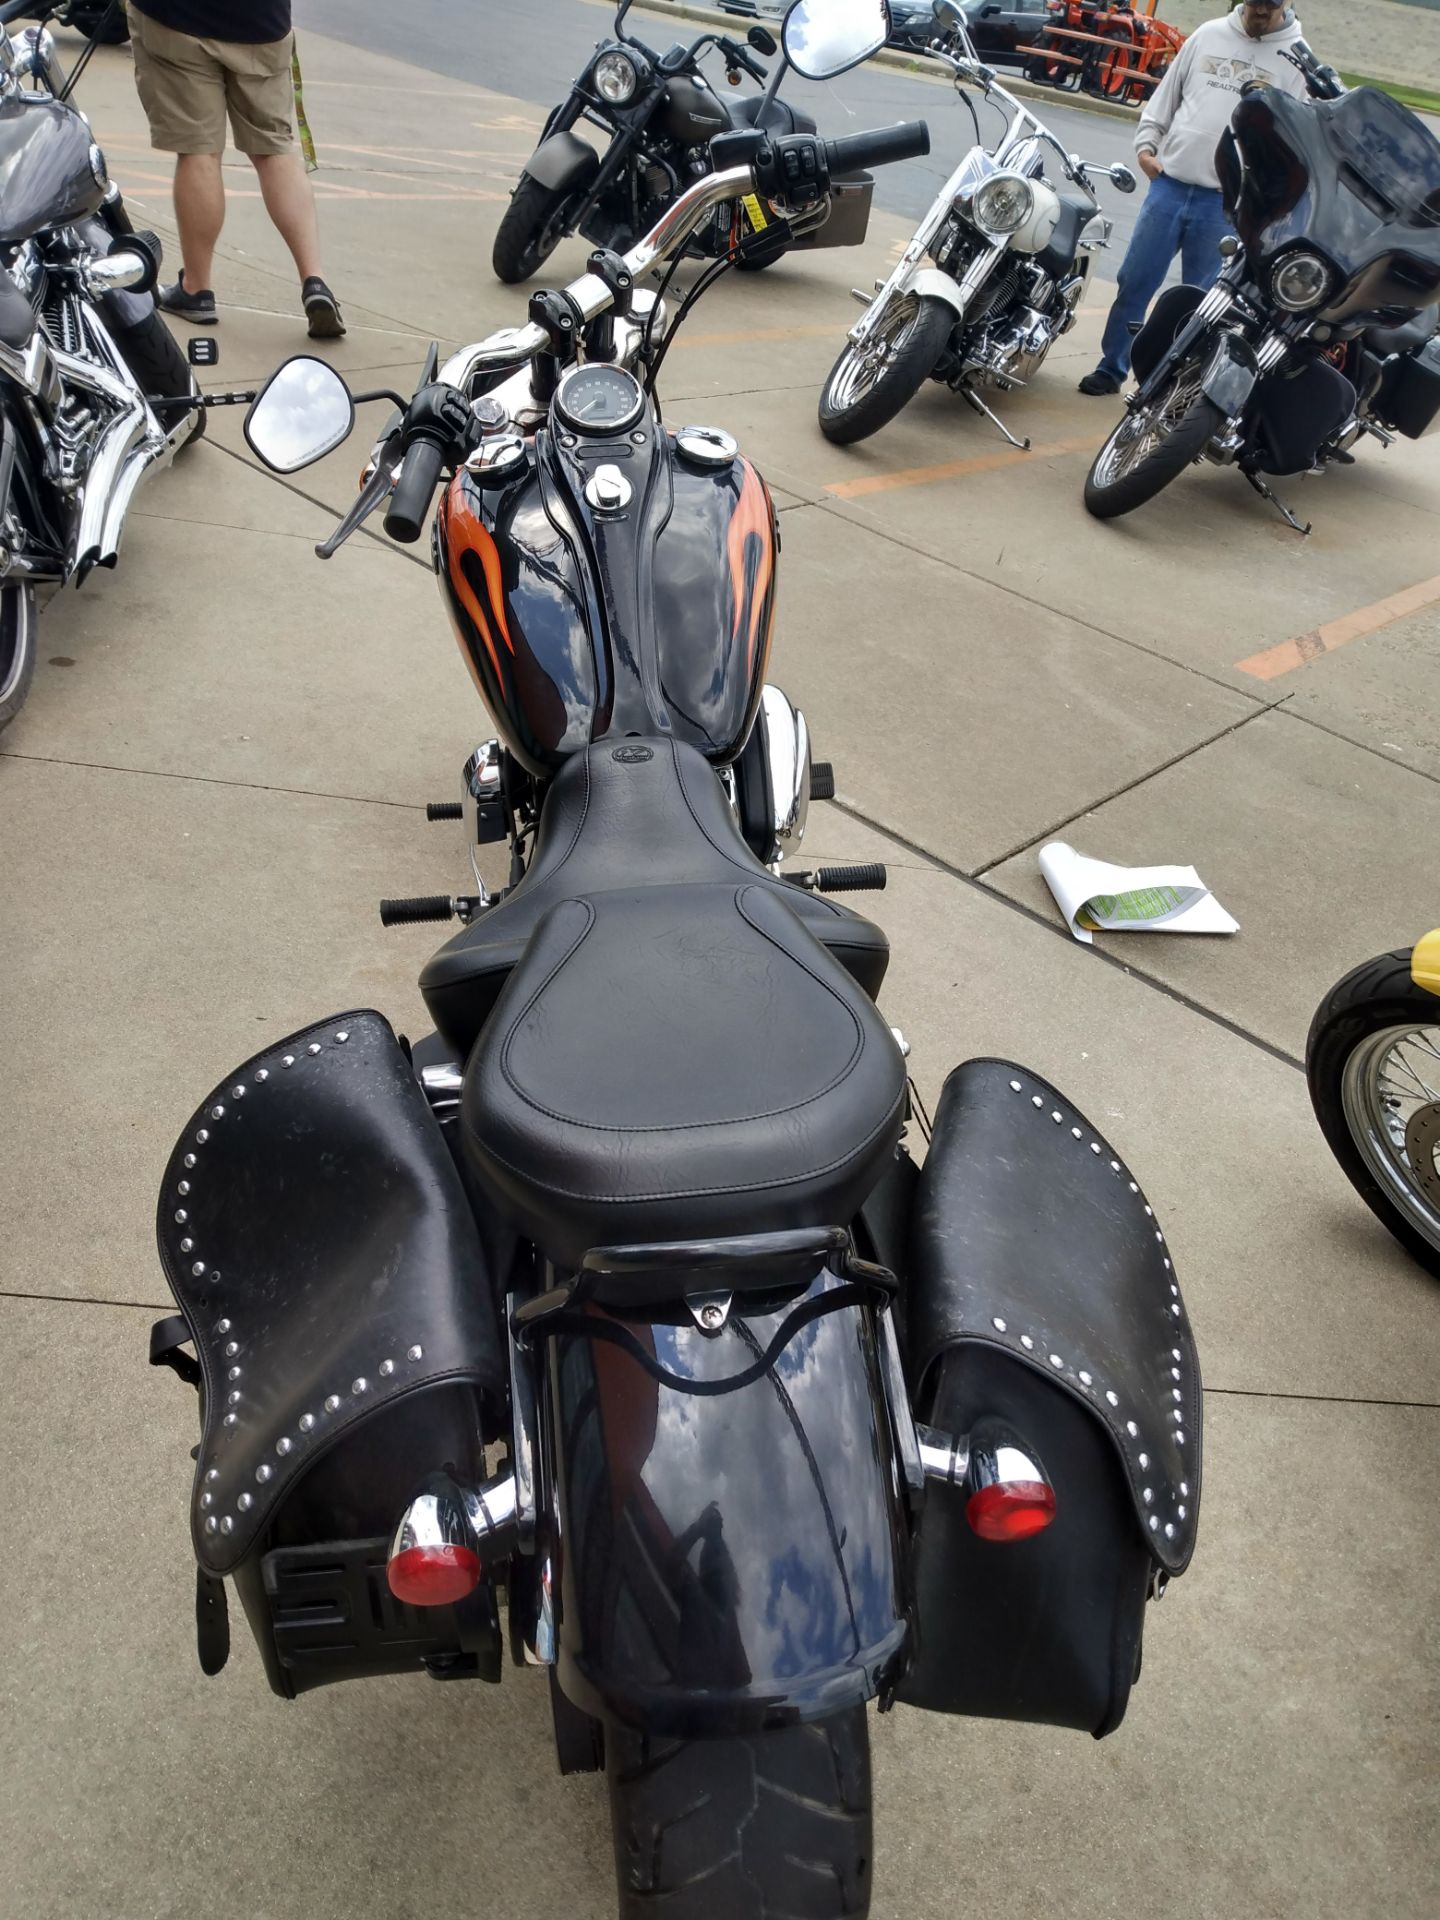 2012 Harley-Davidson FXDWG103 in Marion, Illinois - Photo 1